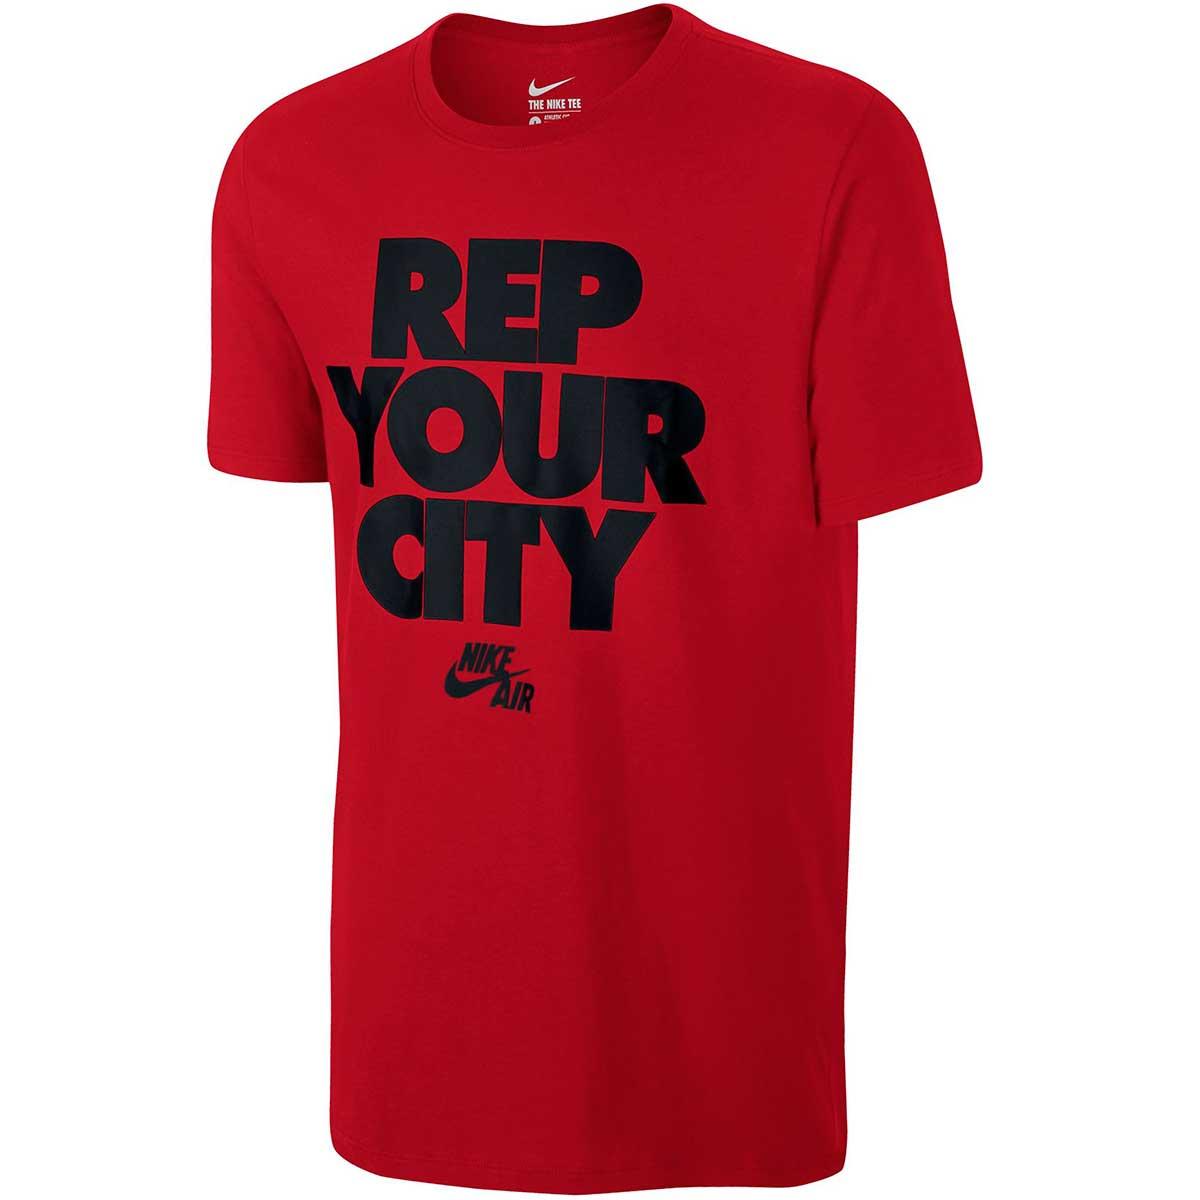 Buy Nike Rep Your City T-Shirt (Red/Black) Online in India